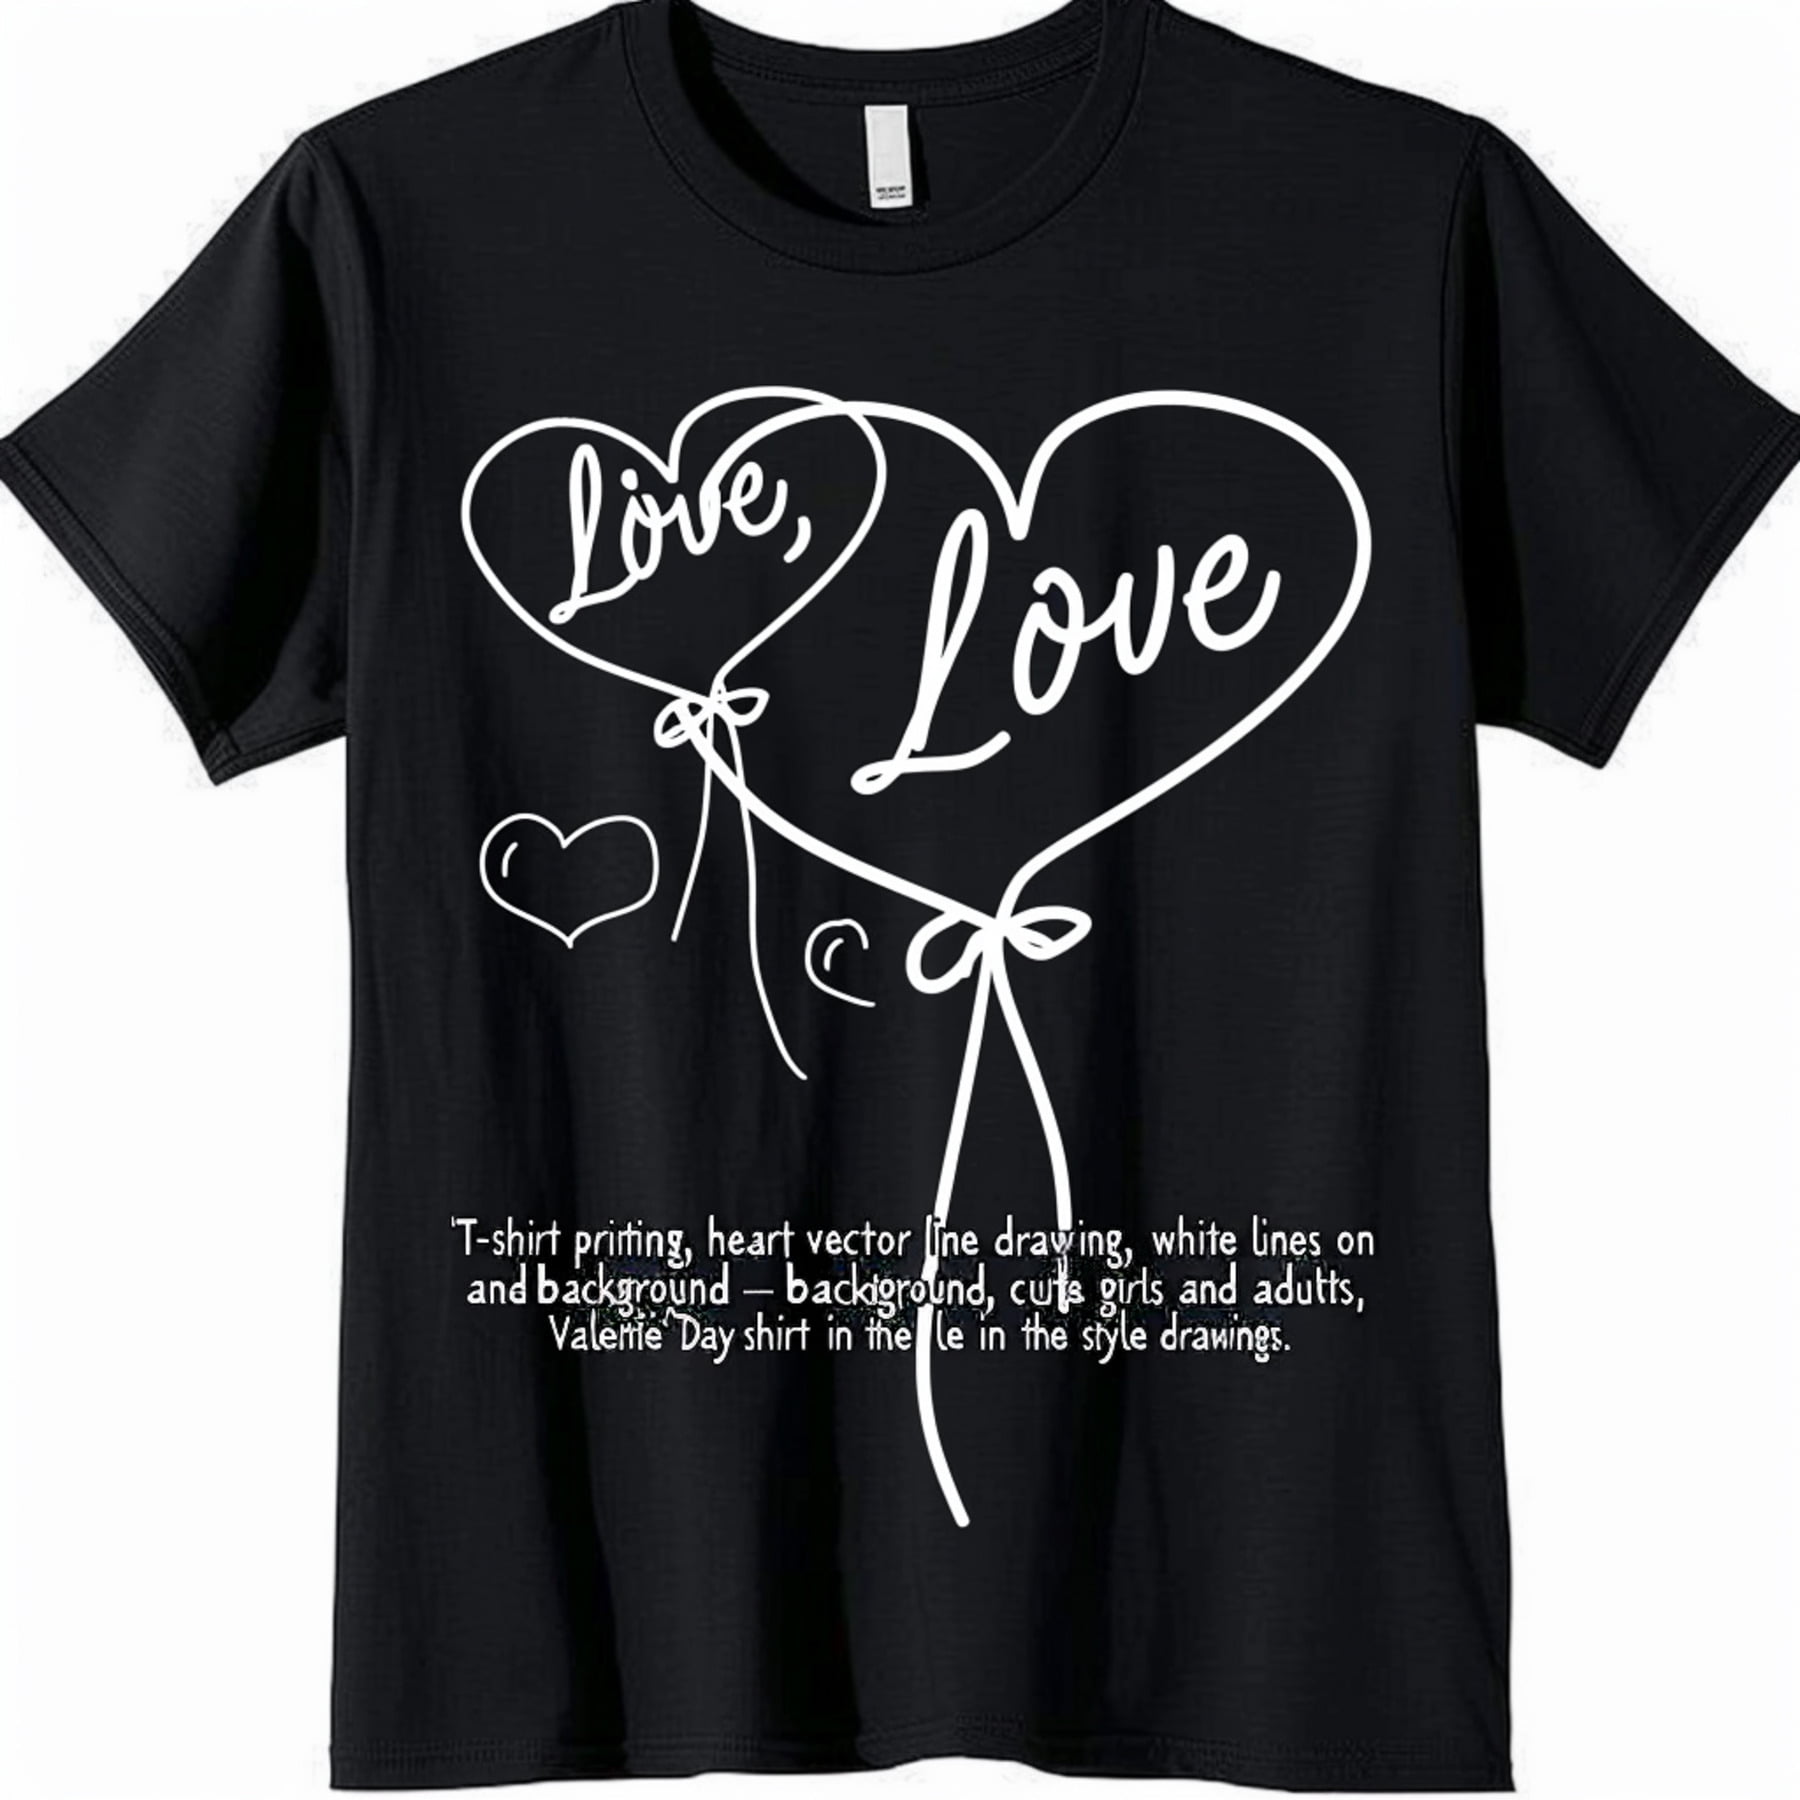 Stylish Black TShirt with Heart Balloon Design Perfect for Valentine's ...